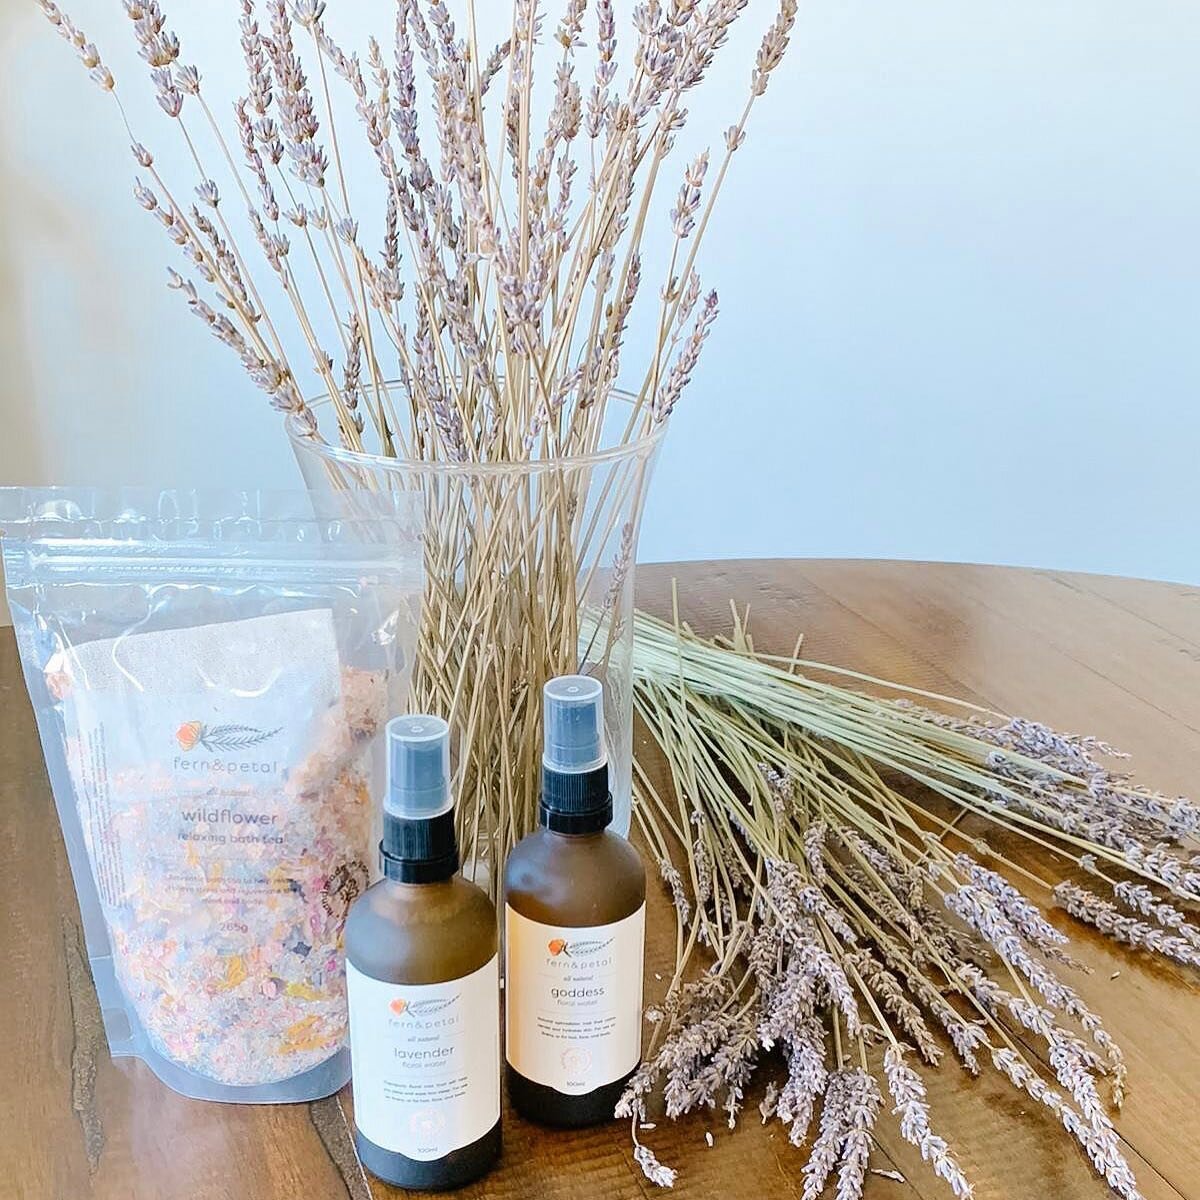 Excited to share that these aromatic sprays and beautifully fragrant tea soak by Fern &amp; Petal will be found in your new Mombitious boxes! 

Baby-Mama box: Lavender Spray

Go-Mama-Go box: Lavender Spray

Cozy-Mama box: &ldquo;Wildflower&rdquo; bat